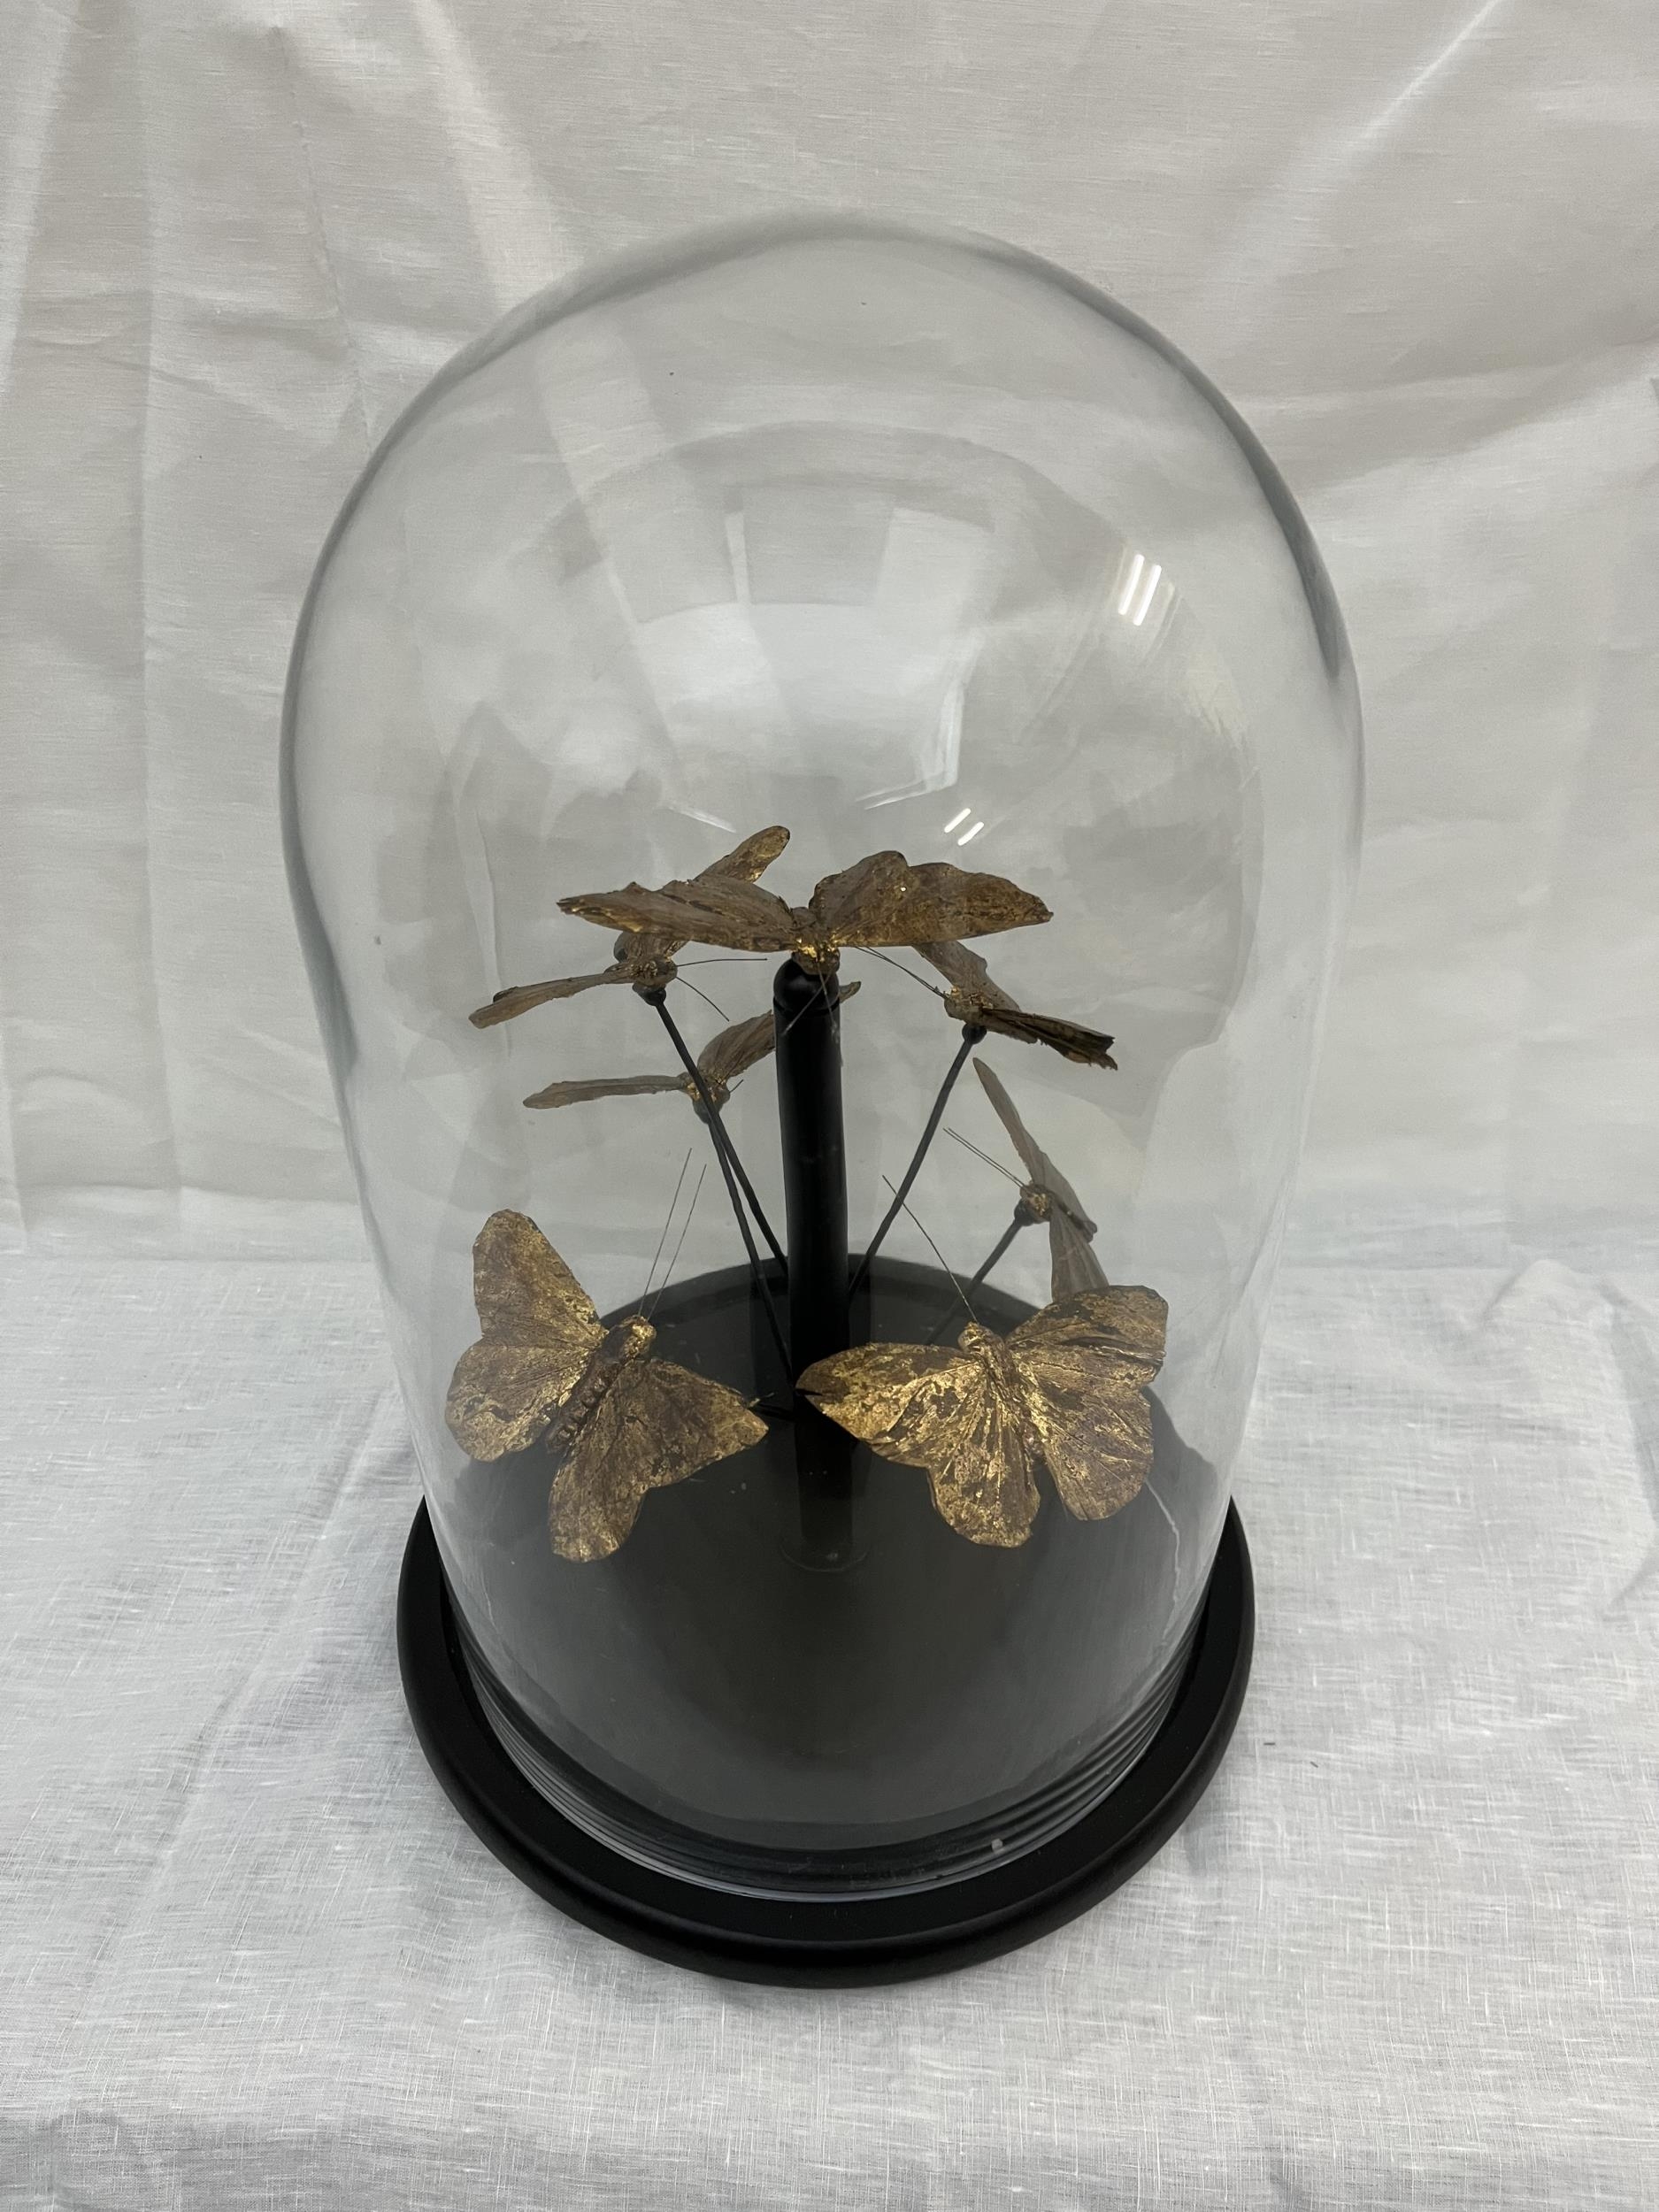 A collection of feather butterflies display under glass dome, contemporary reproduction with moulded - Image 2 of 4